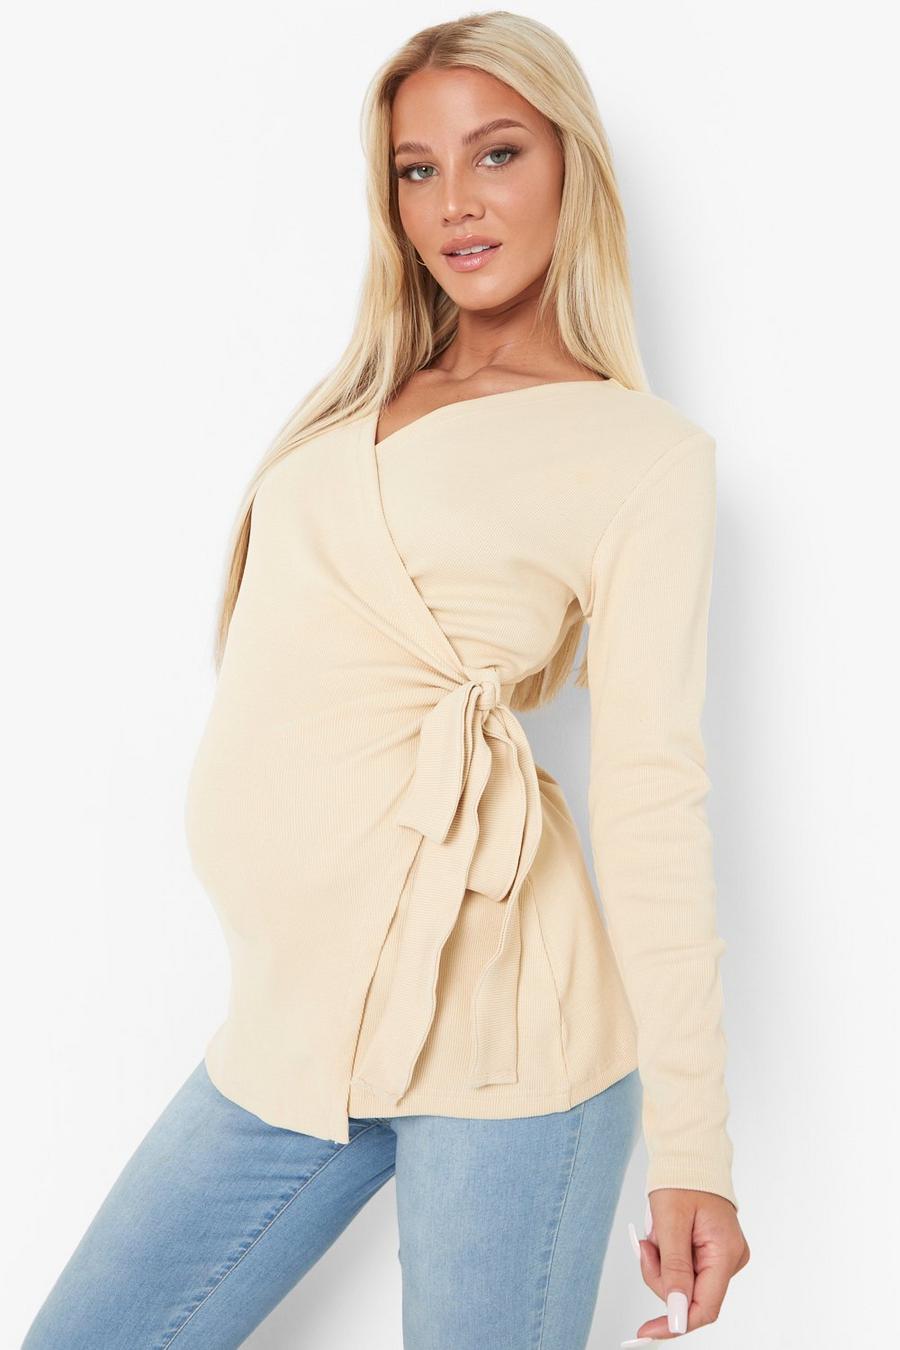 Clay Maternity Rib Wrap Tie Waist Top image number 1